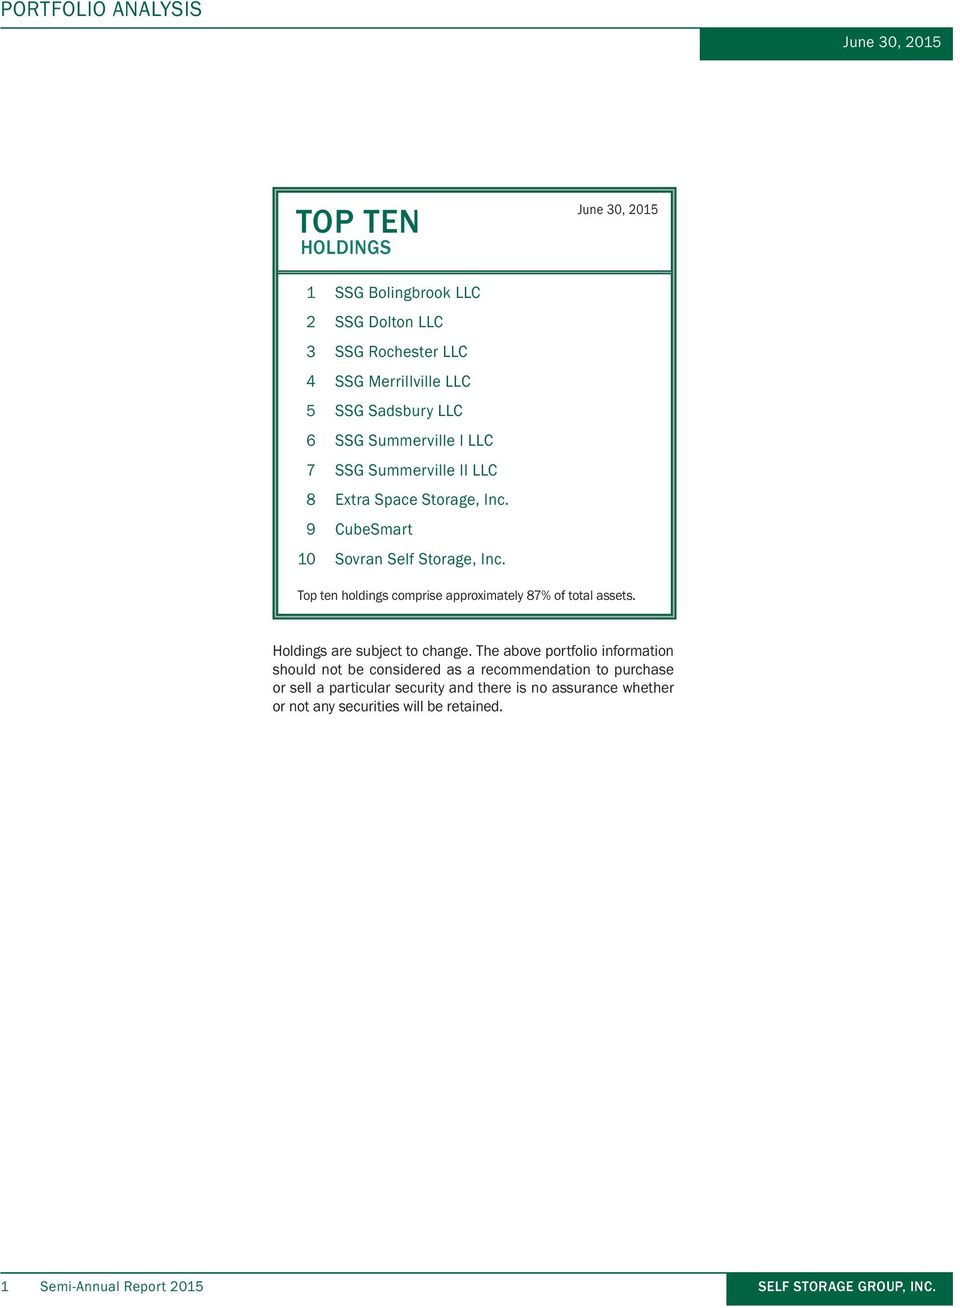 Top ten holdings comprise approximately 87% of total assets. Holdings are subject to change.